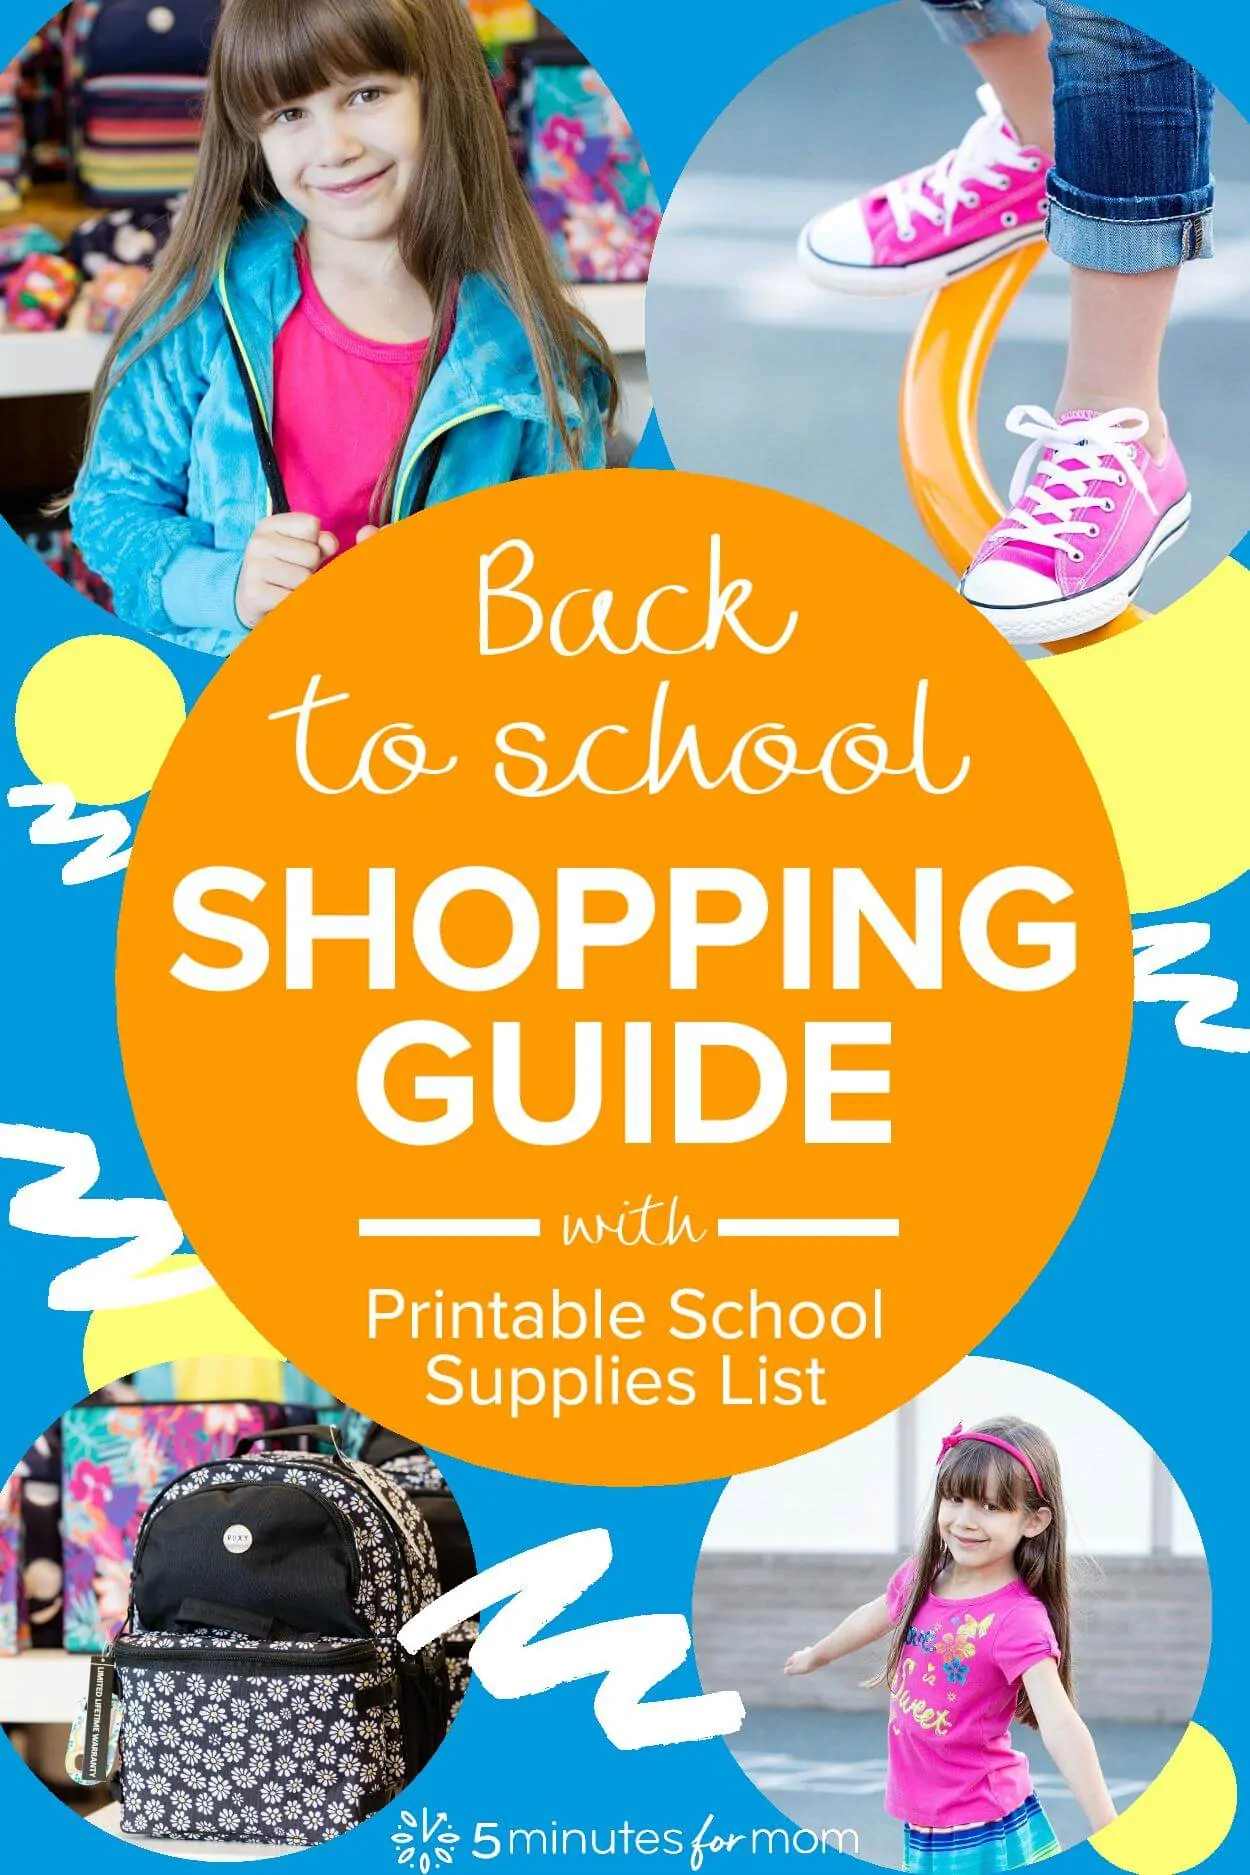 Ultimate Back To School Guide with Printable School Supplies